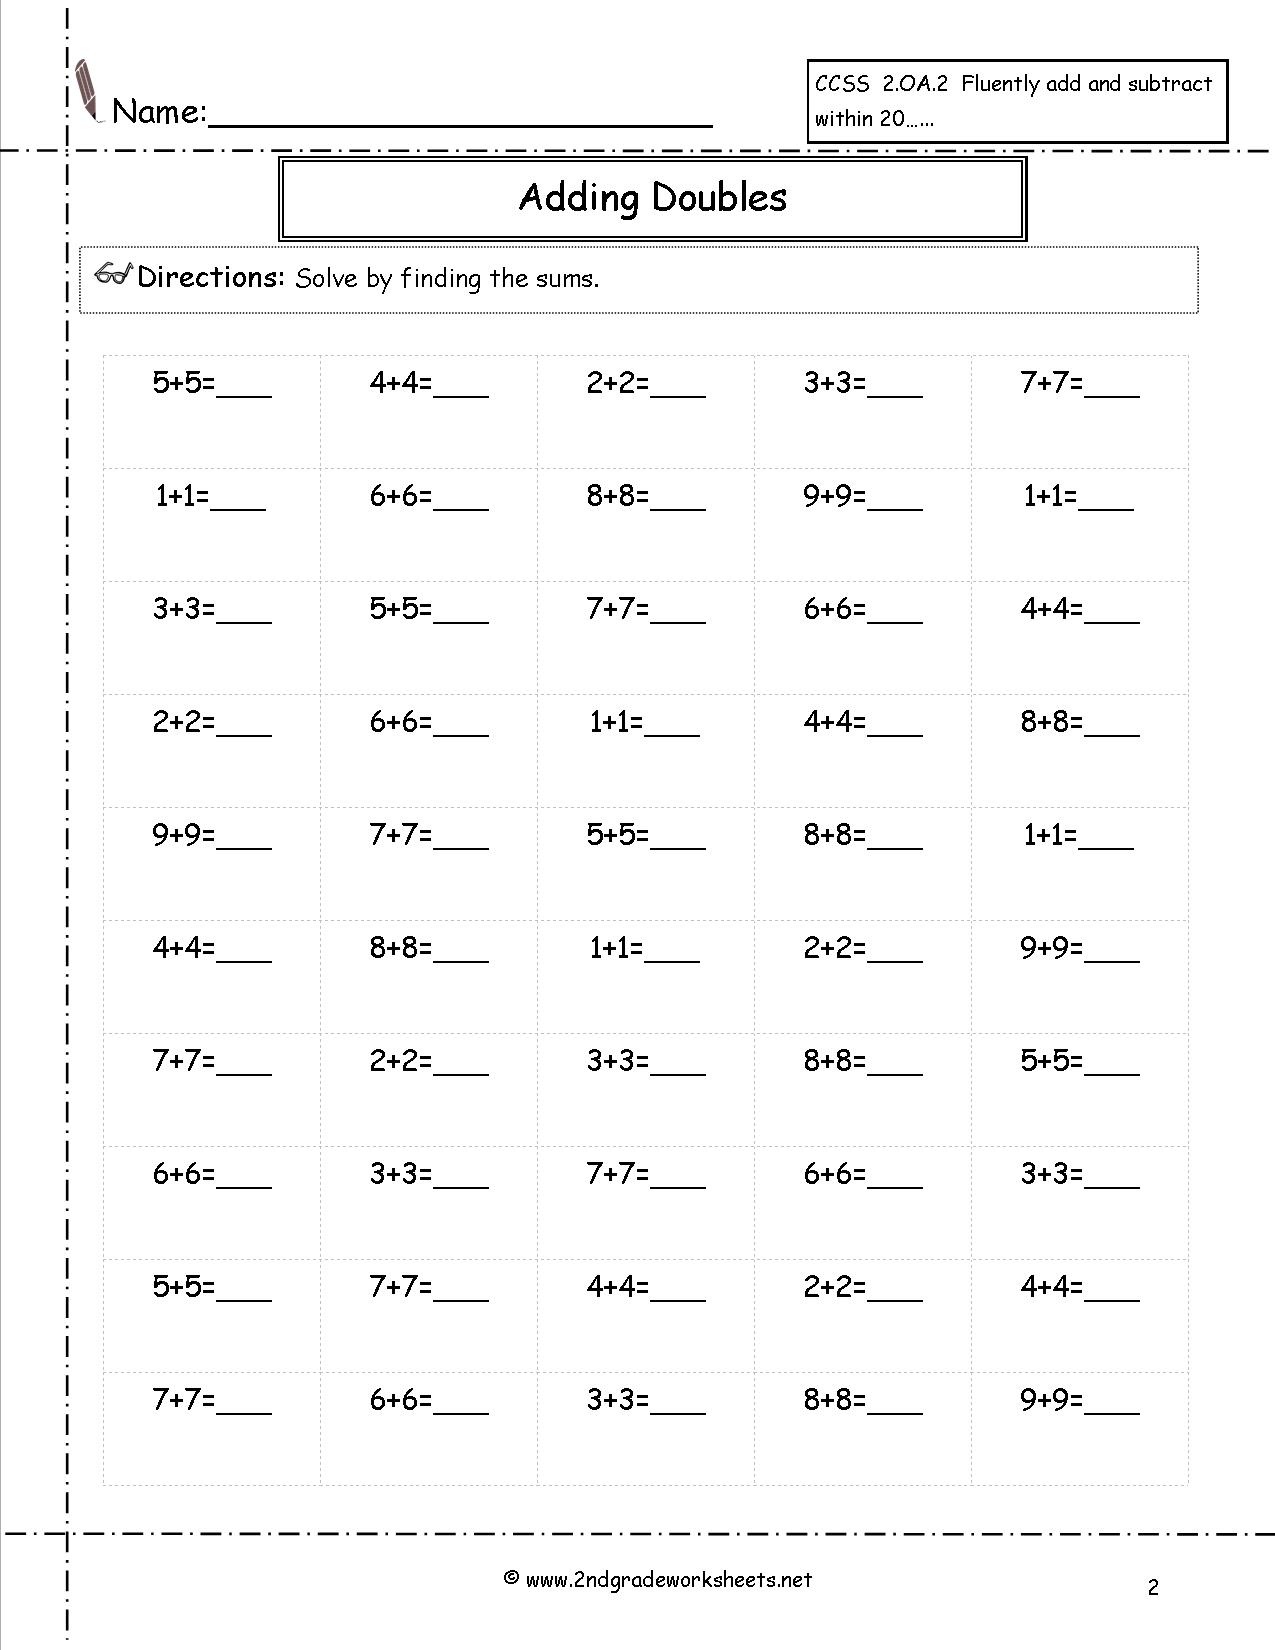 Free Math Worksheets And Printouts - Free Printable Math Worksheets Addition And Subtraction